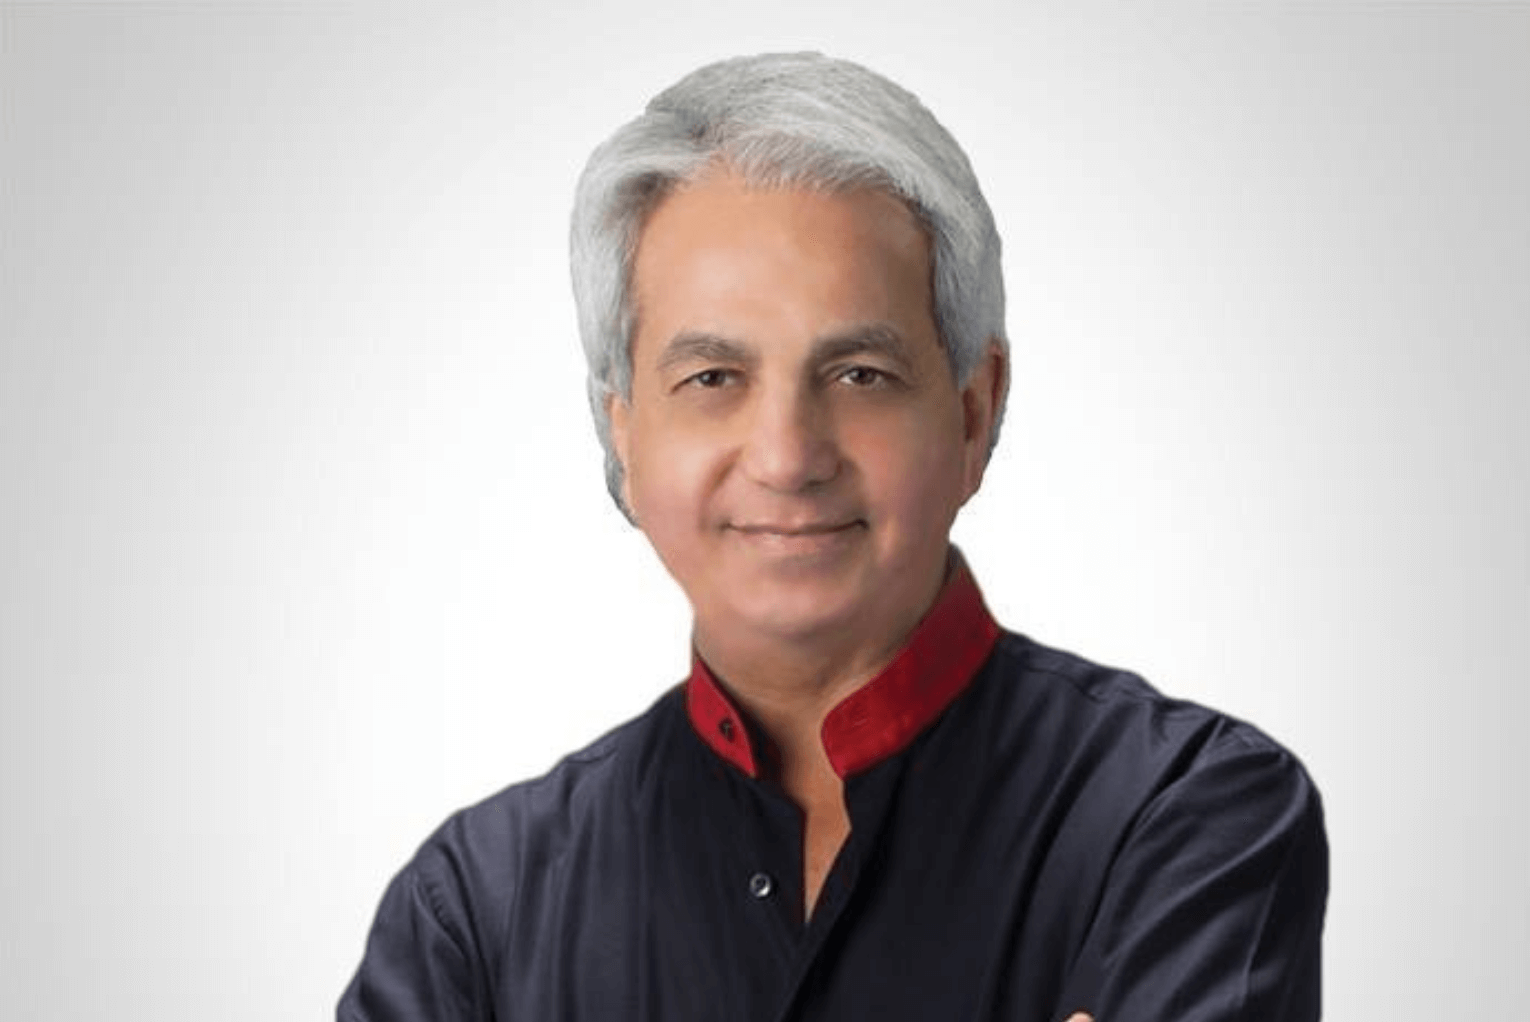 Benny Hinn: Does He Need to Repent?